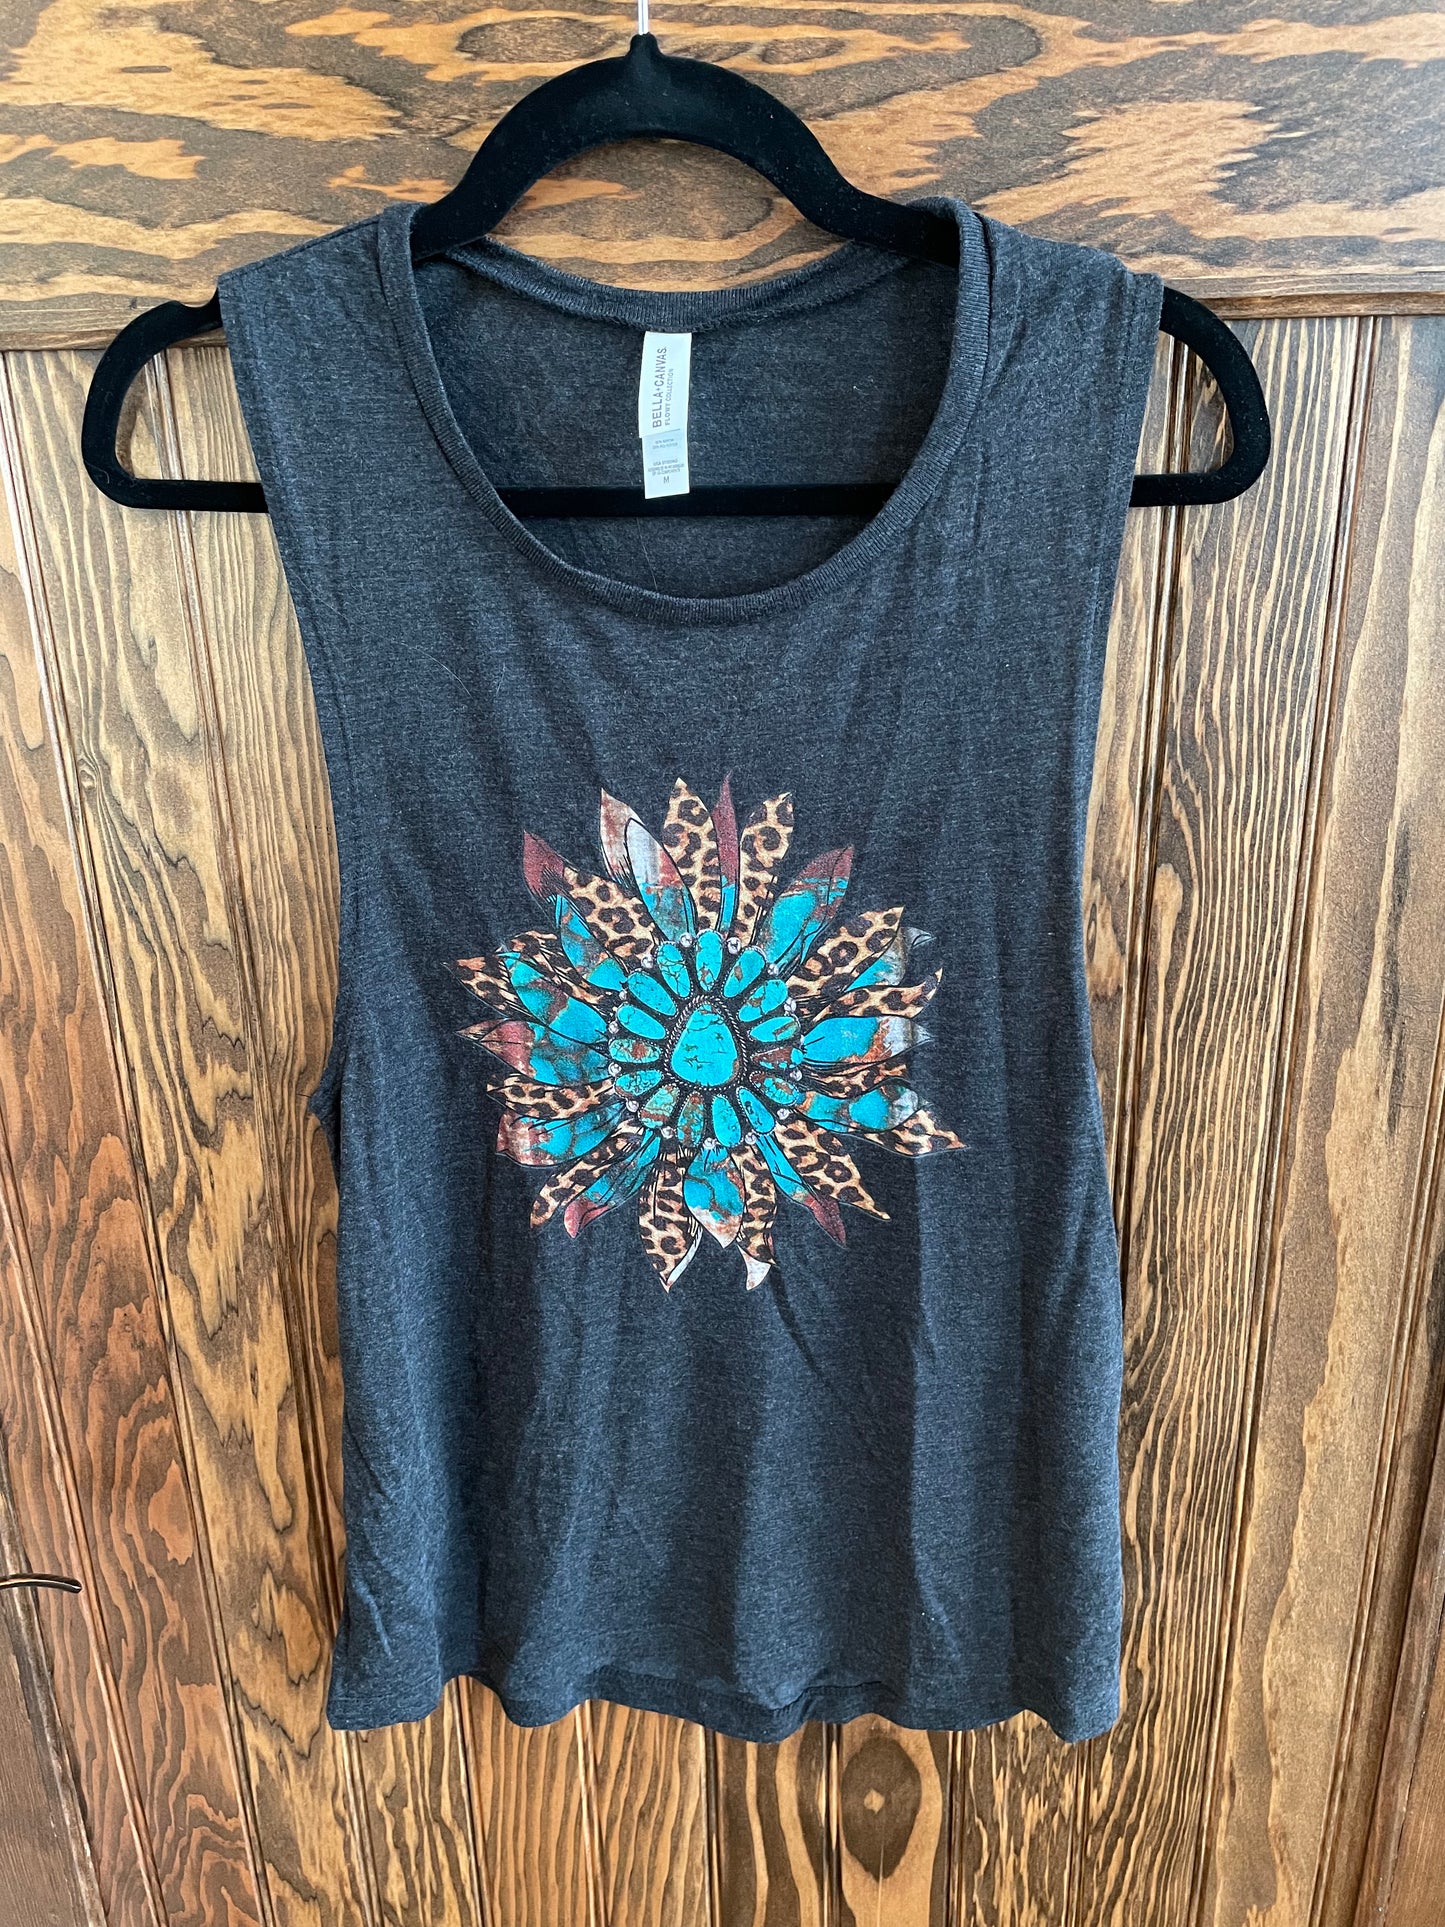 Turquoise Sunflower Graphic Tank Top